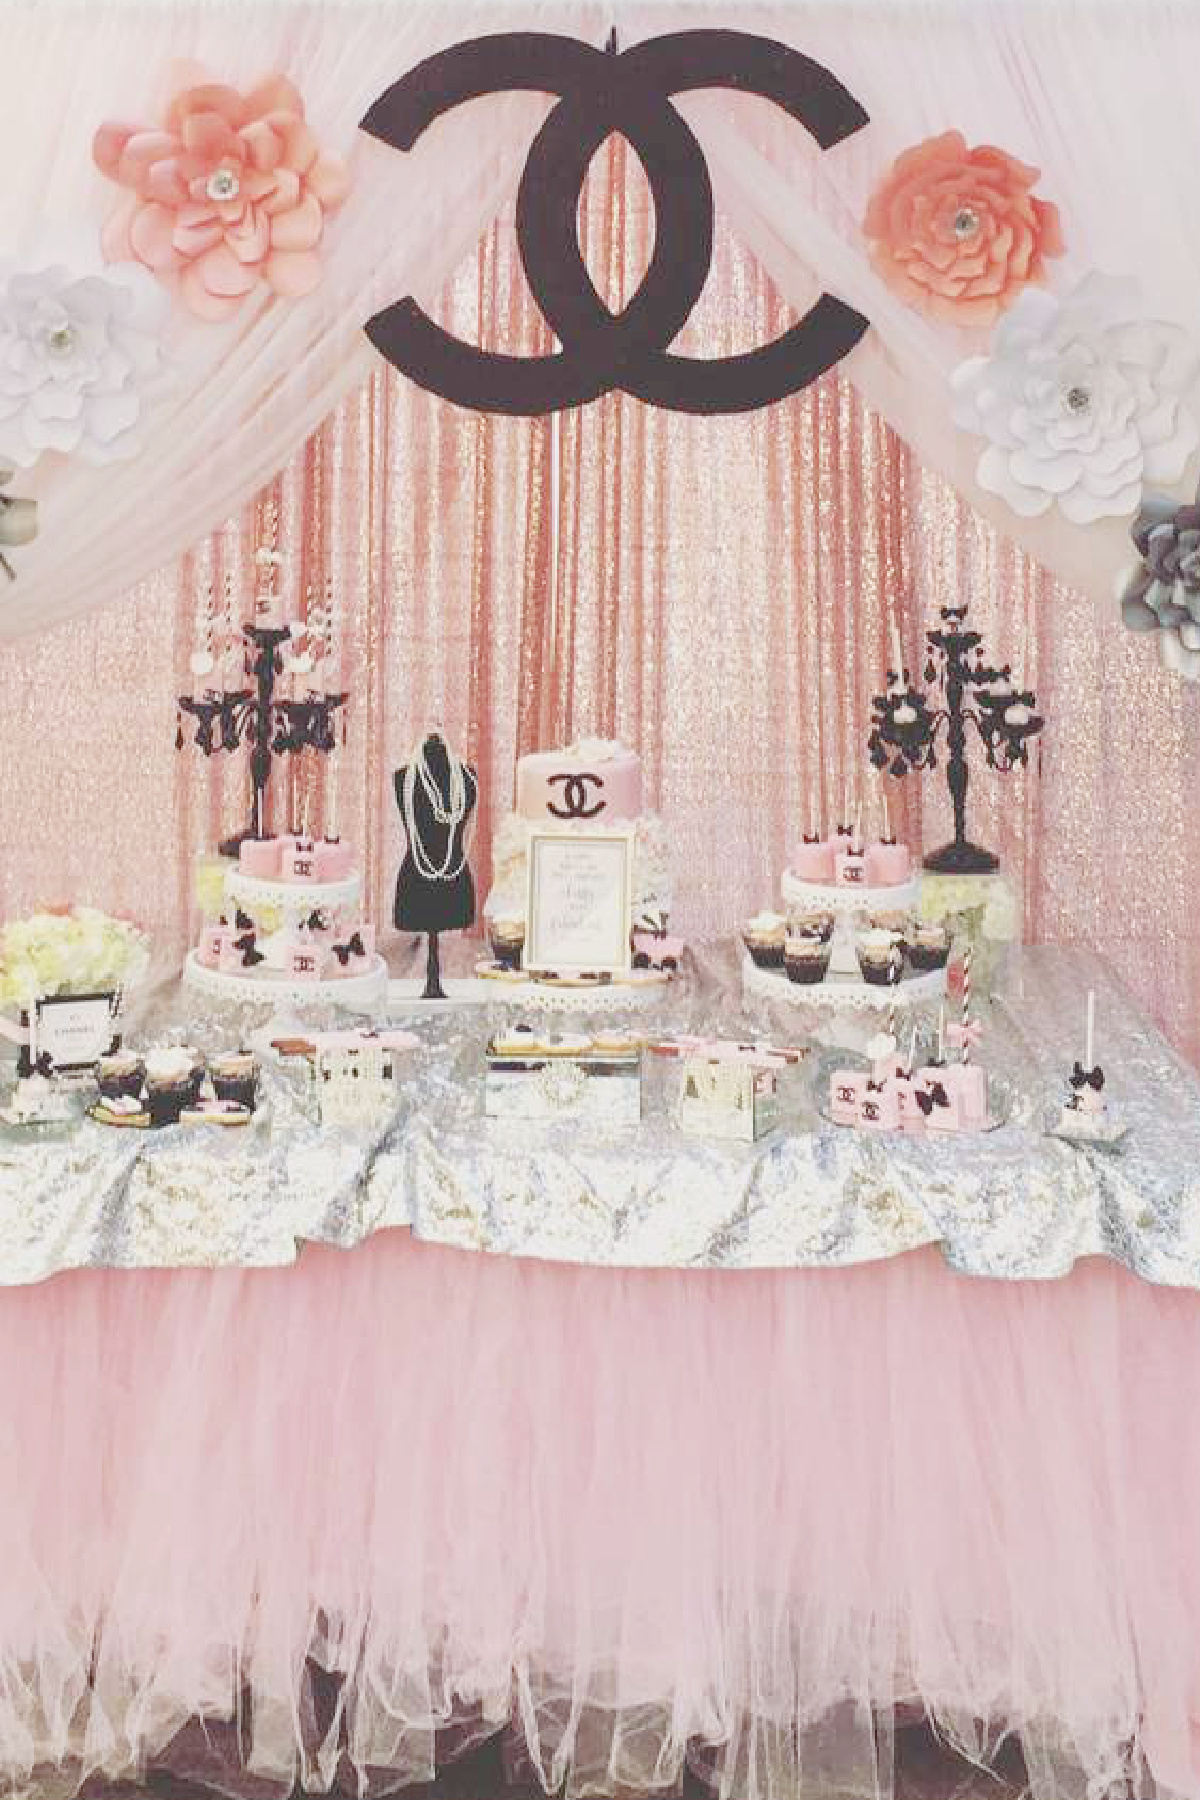 Fashion-Themed Baby Shower